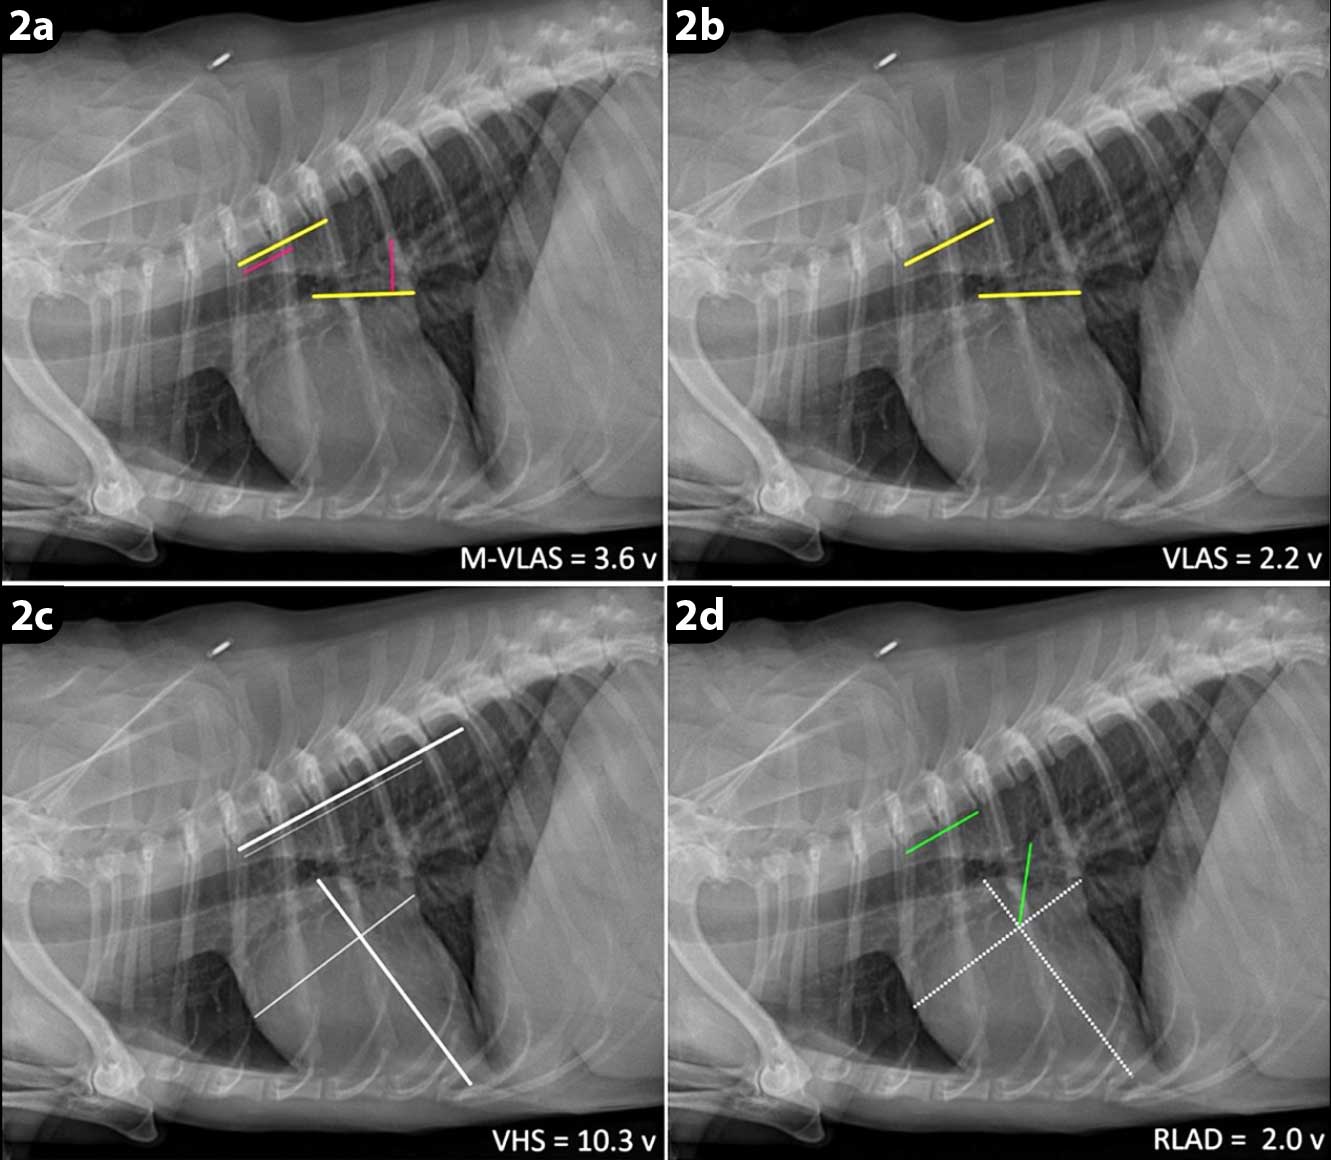 Figure 2. Radiographic quantification of left atrial size in dogs with myxomatous mitral valve disease16. Image: Lam et al16